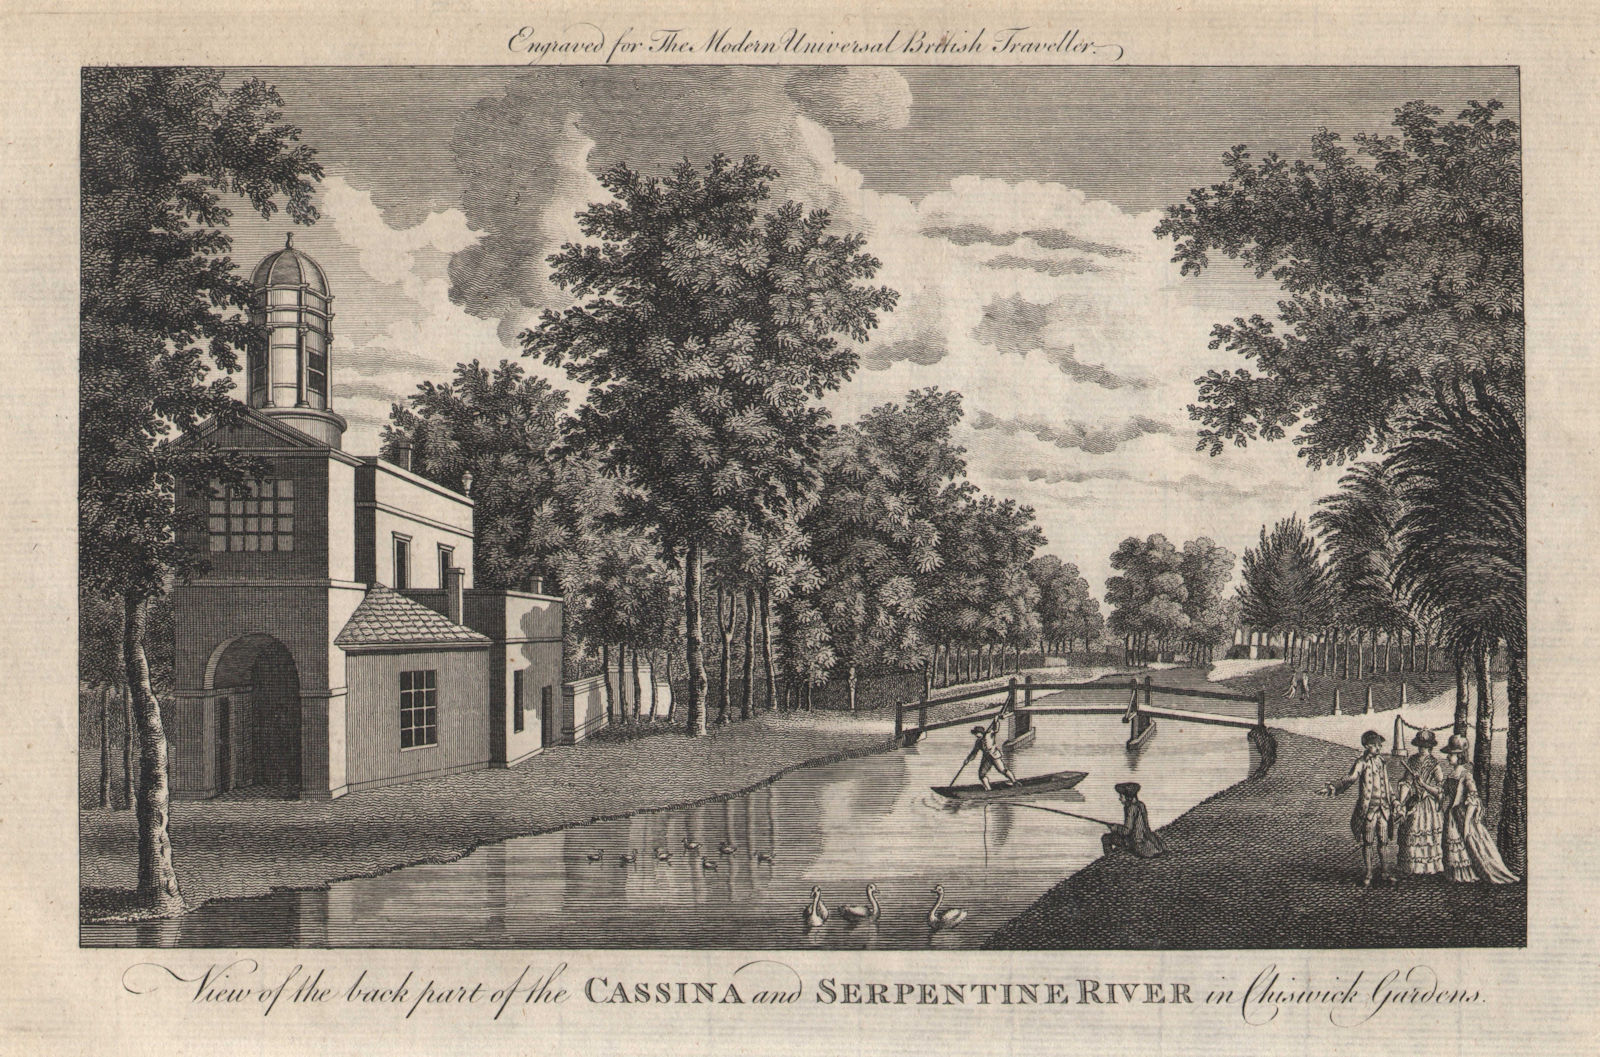 The Cassina and Serpentine River, Chiswick House & Gardens. BURLINGTON 1779